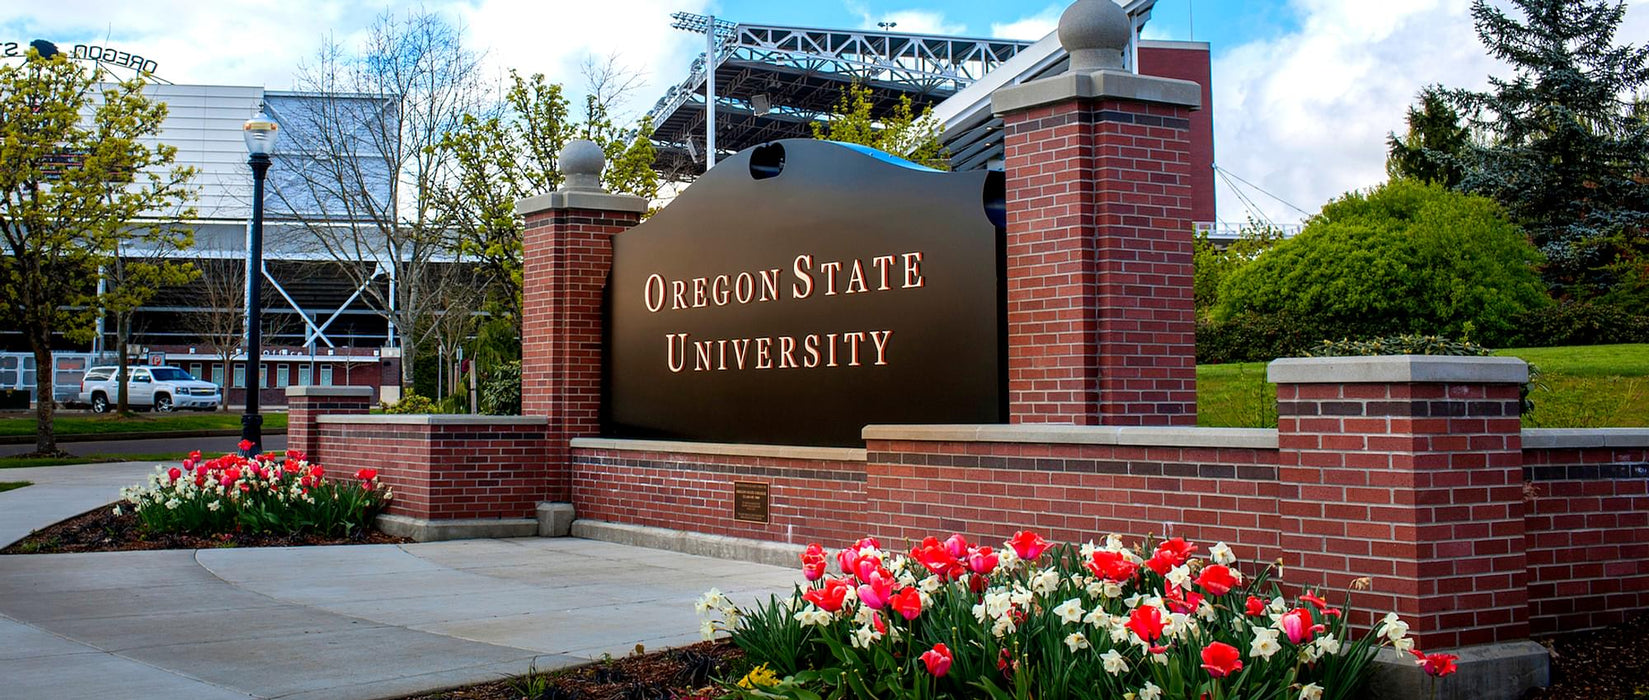 Master of Engineering - Industrial Engineering at Oregon State University - Corvallis: Tuition: $29,700.00 USD/year (Scholarship Available)